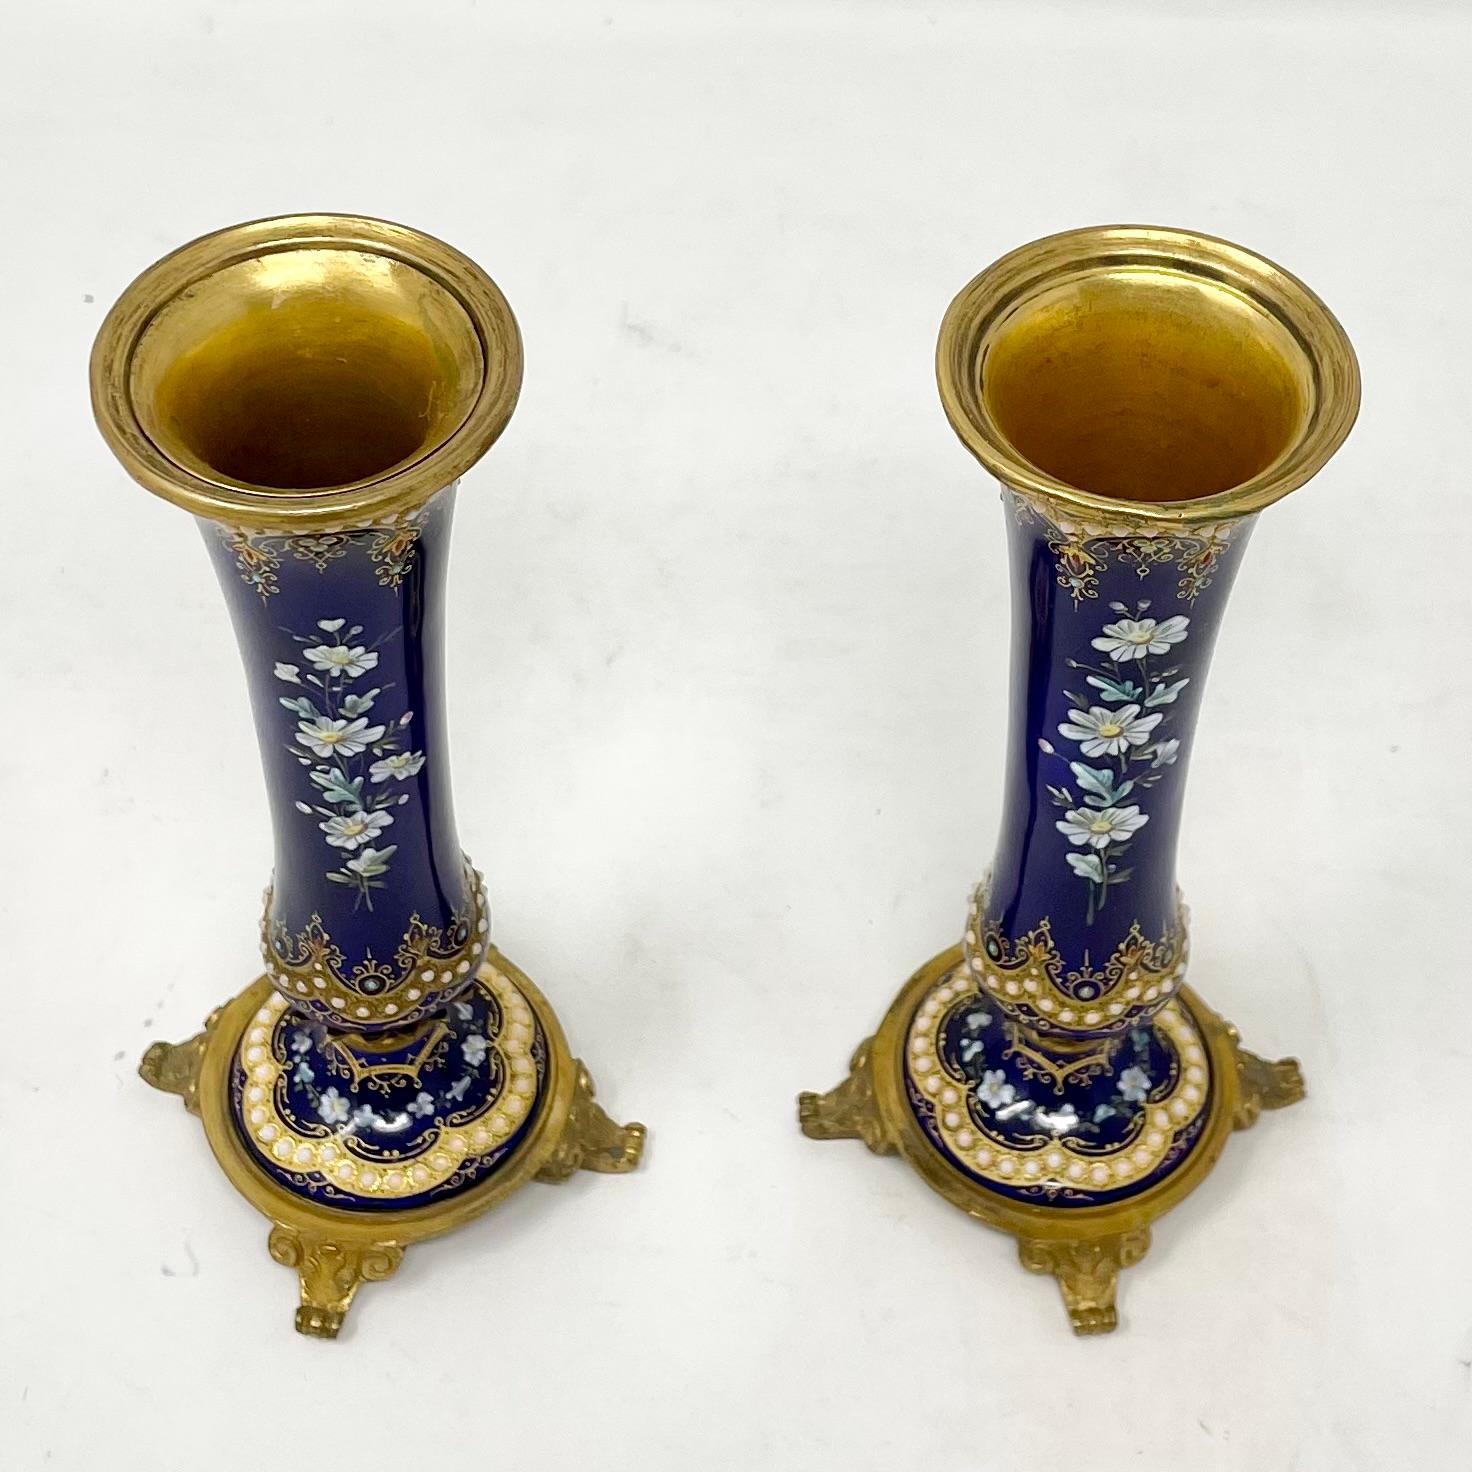 Exquisitely Made Antique French Napoleon III Gold Bronze Mounted Cobalt Porcelain vases with Enameling, Circa 1870-1880.